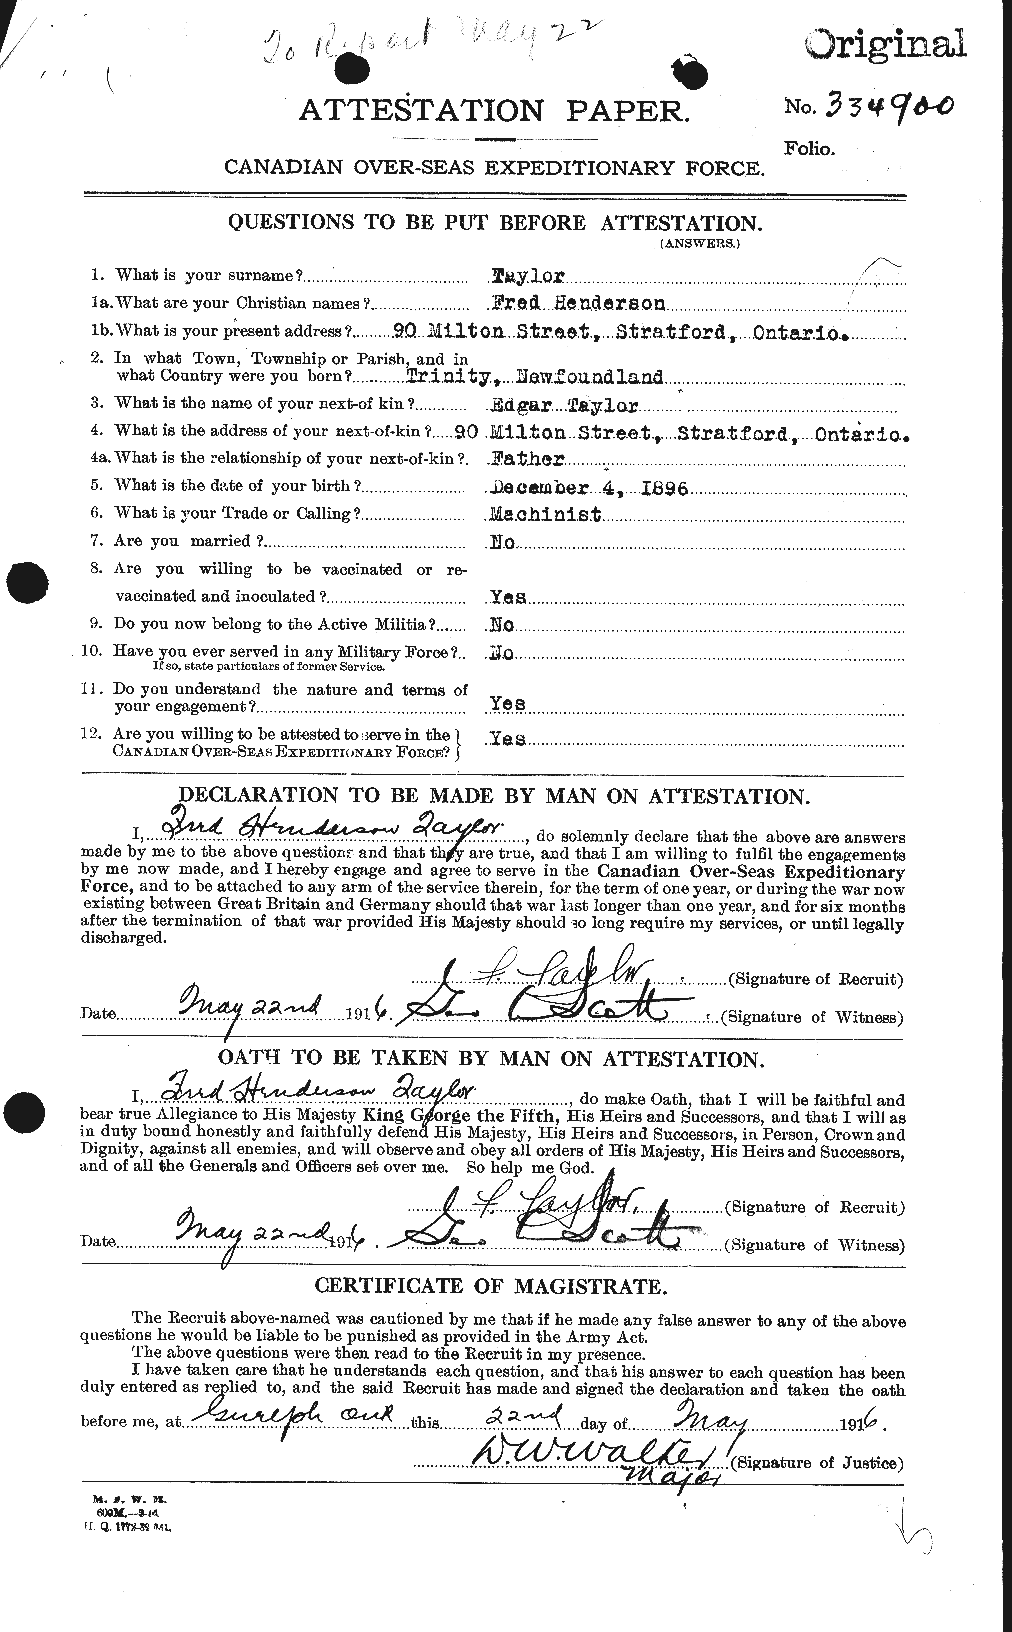 Personnel Records of the First World War - CEF 625753a